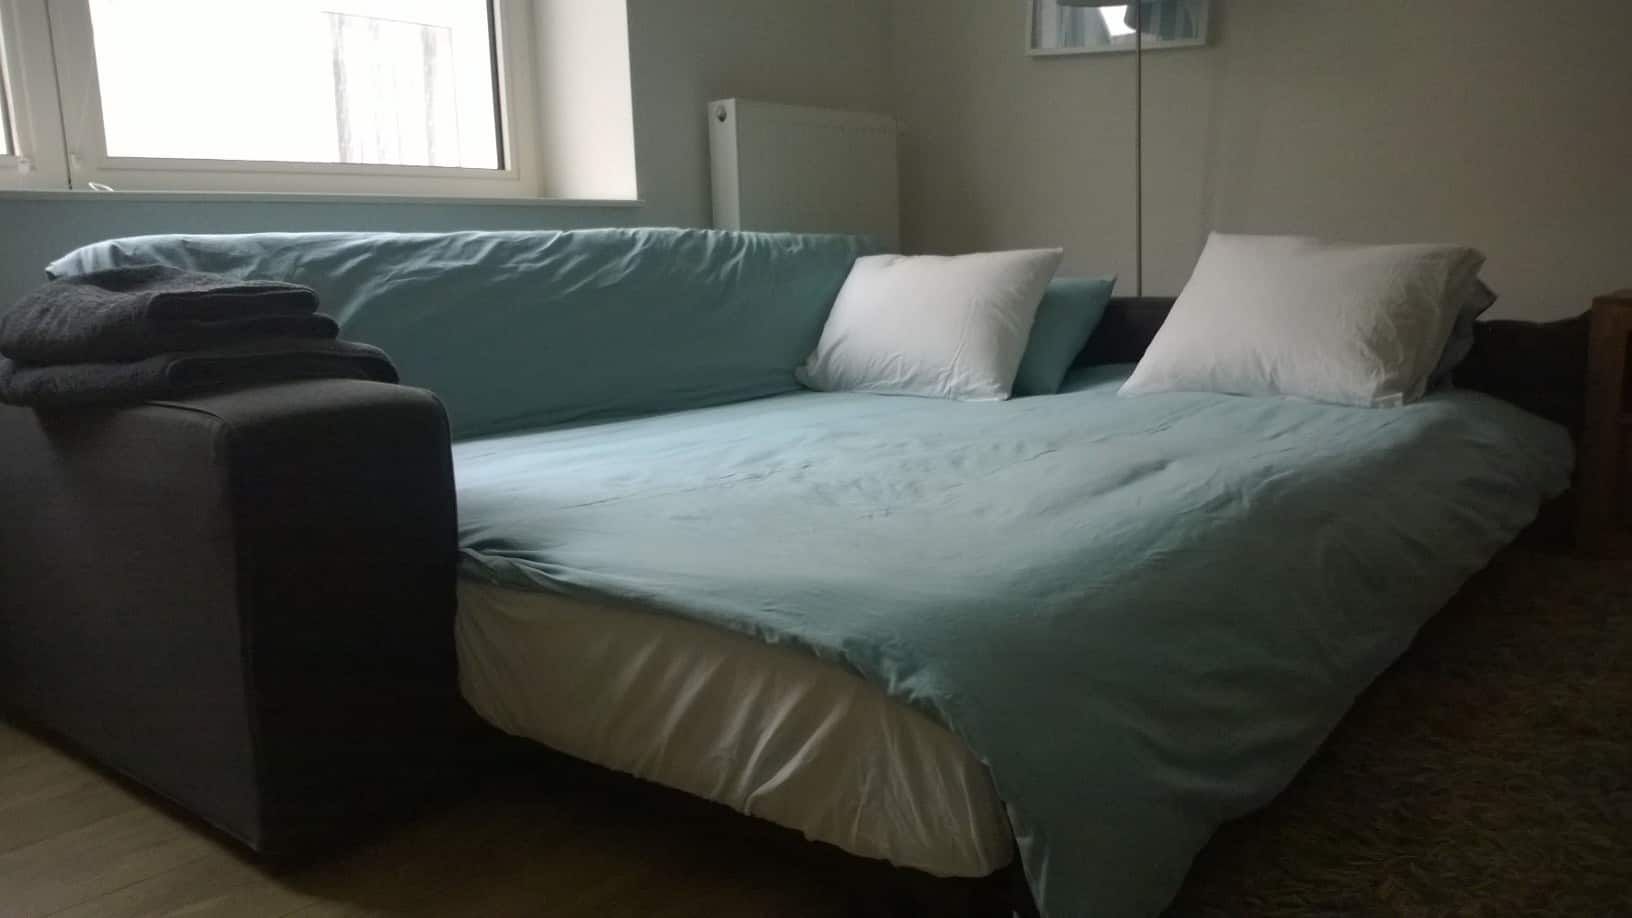 Rental apartment in Ghent